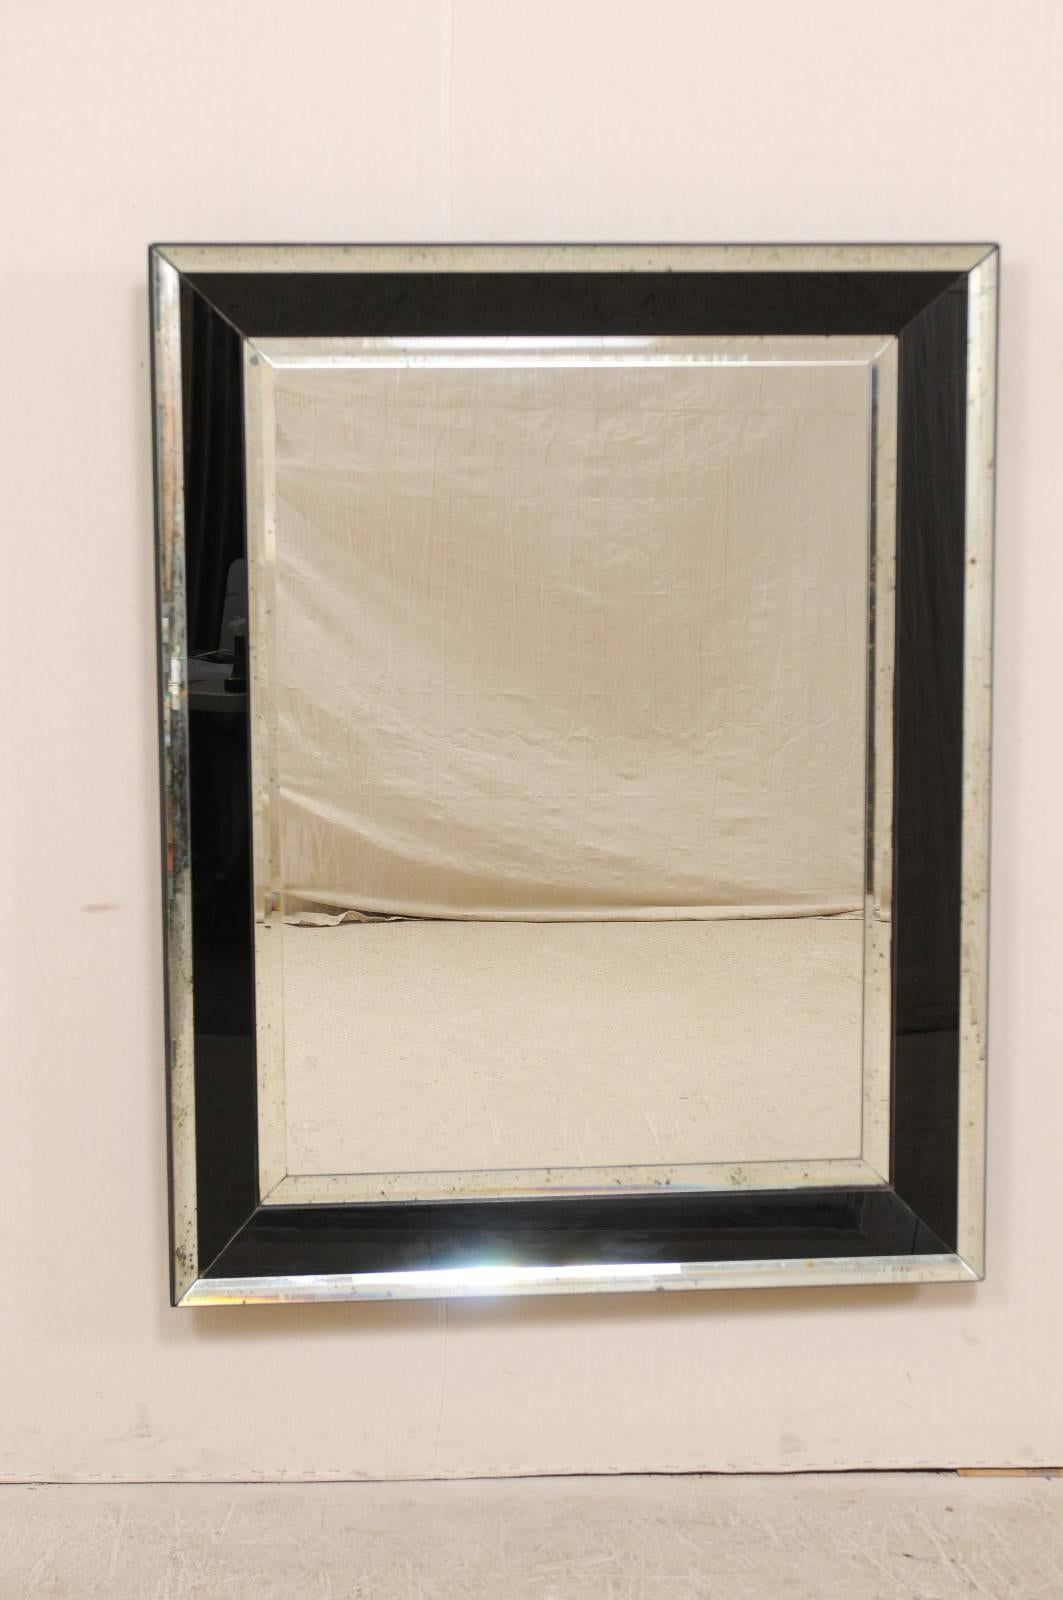 A vintage American large-sized, rectangular shaped mirror with accentuated black and antiqued glass border. This American mirror features a clear centre glass with black glass surround, framed within antiqued glass sections. This distinctive mirror